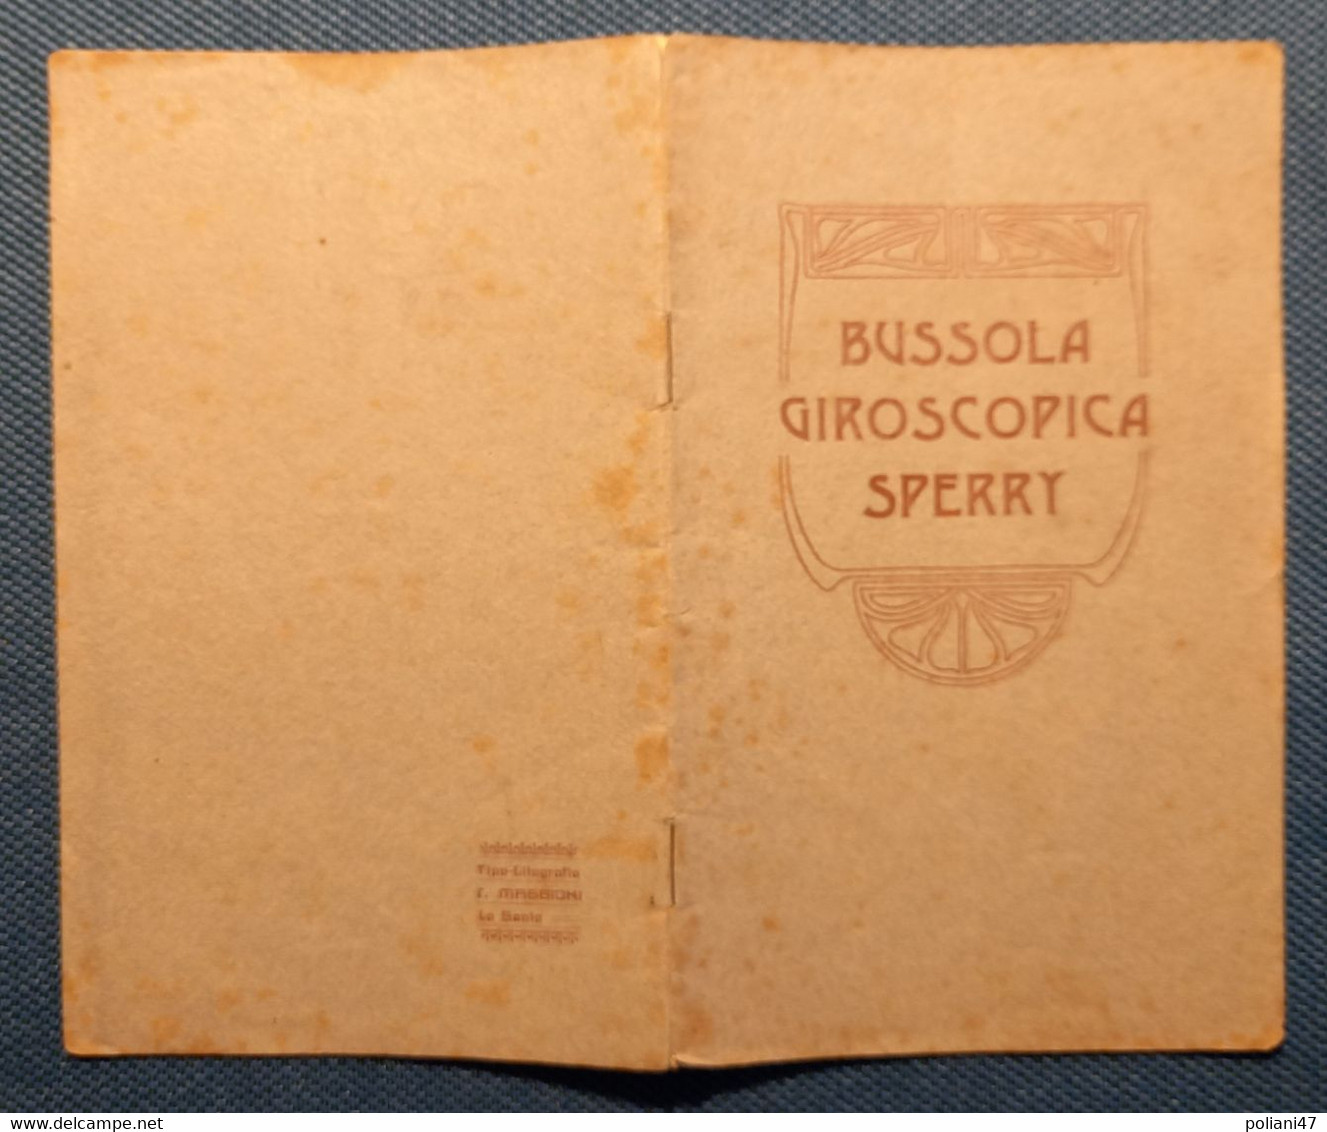 0527 "BUSSOLA GIROSCOPICA SPERRY - INDICA SEMPRE IL NORD...." OPUSCOLO - Geschichte, Philosophie, Geographie